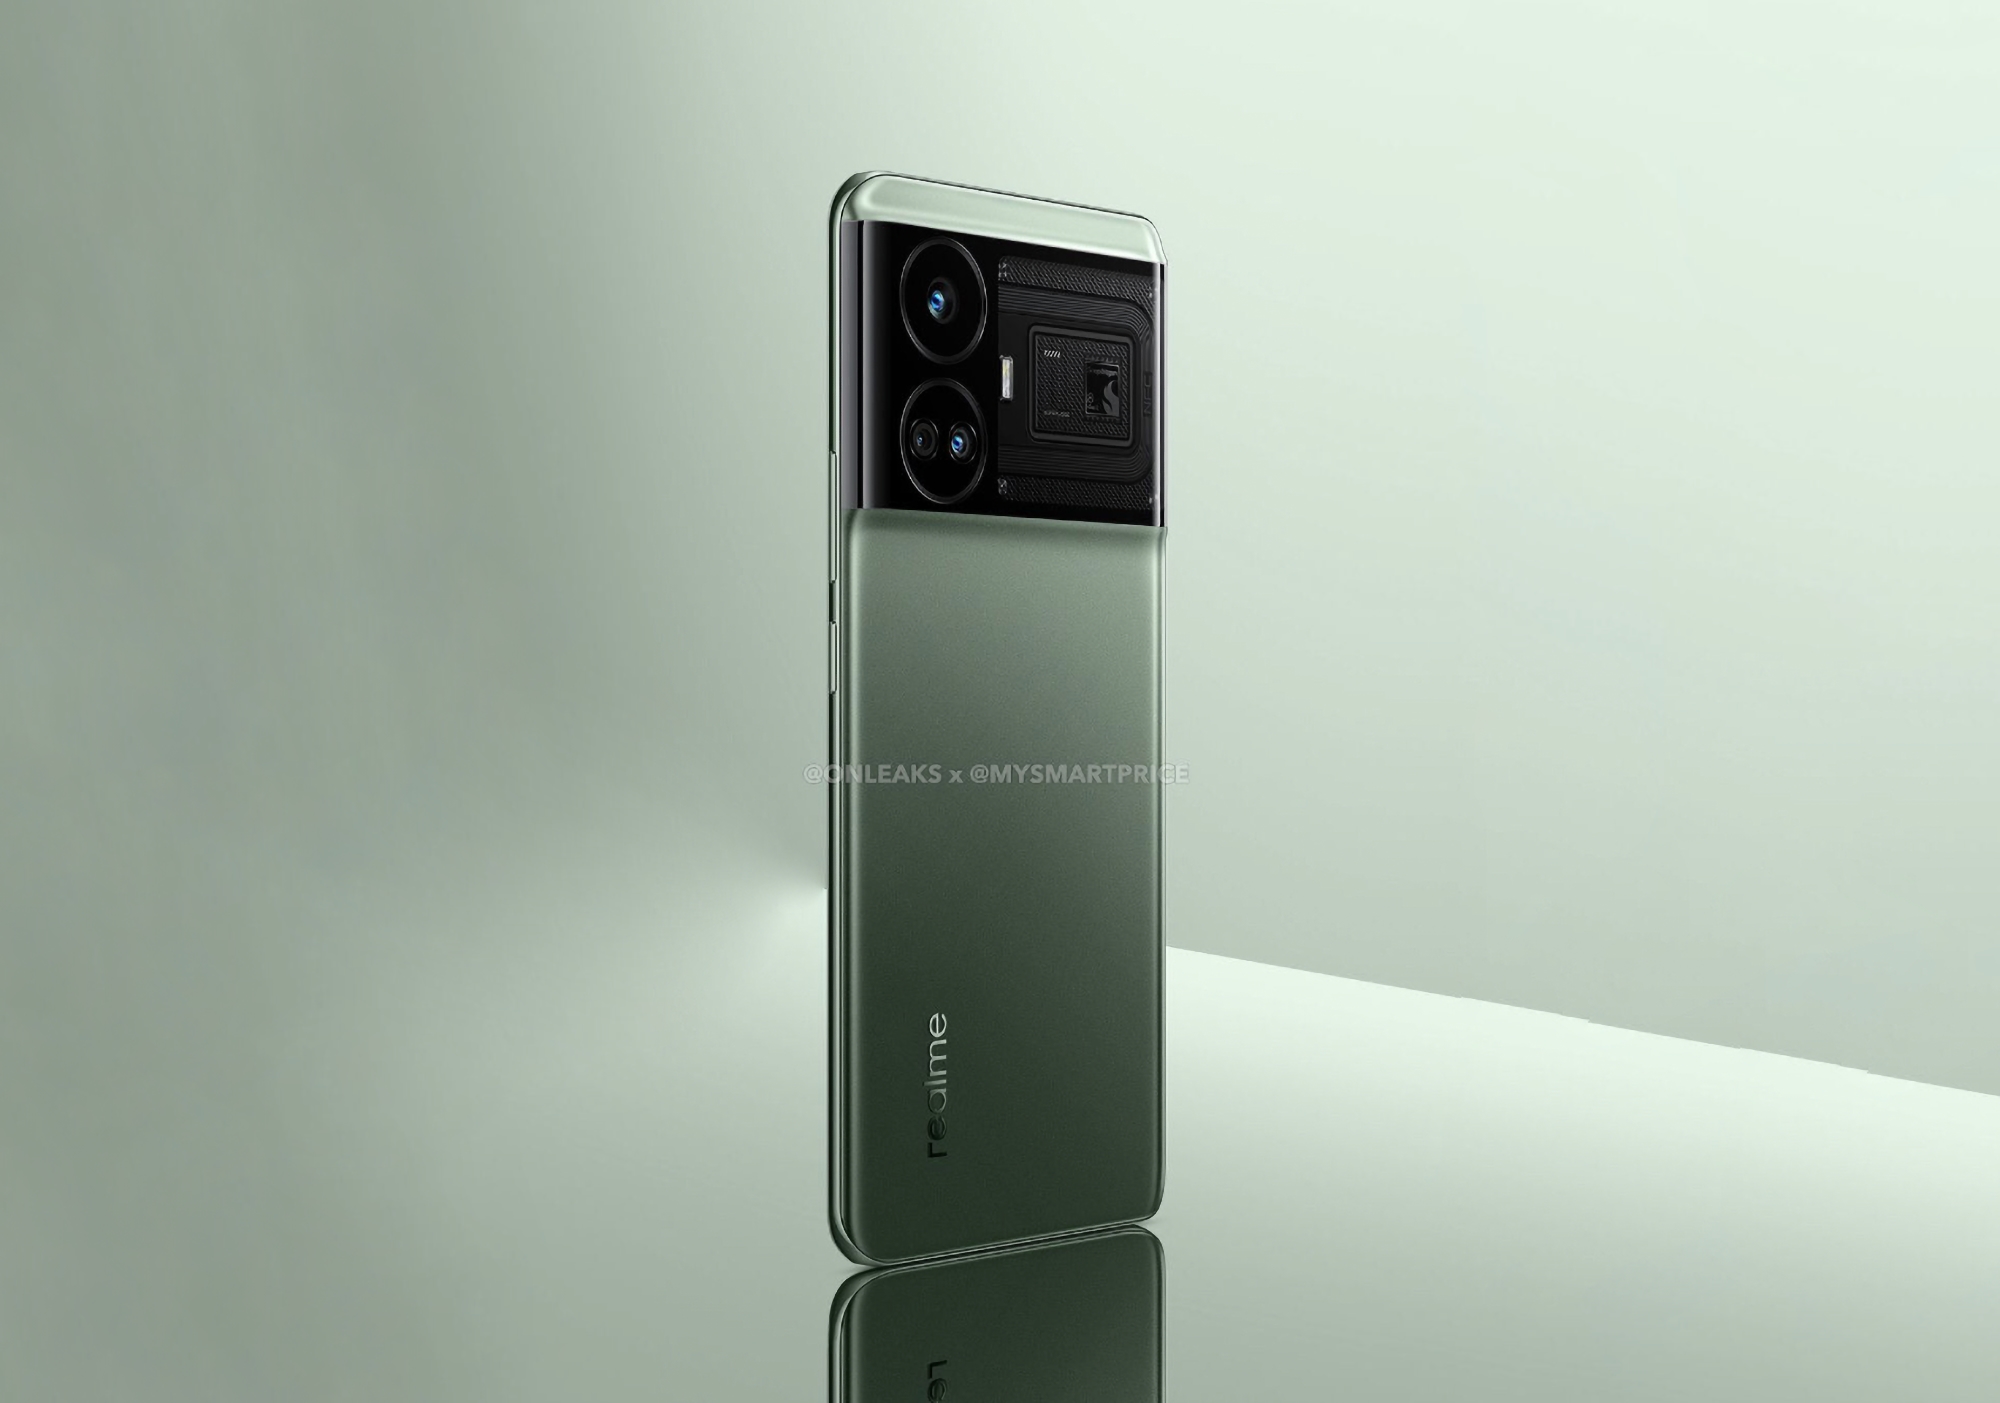 144Hz OLED screen, Snapdragon 8 Gen 2 chip, 50 MP camera and 240W charging: details of the realme GT Neo 6 have surfaced online